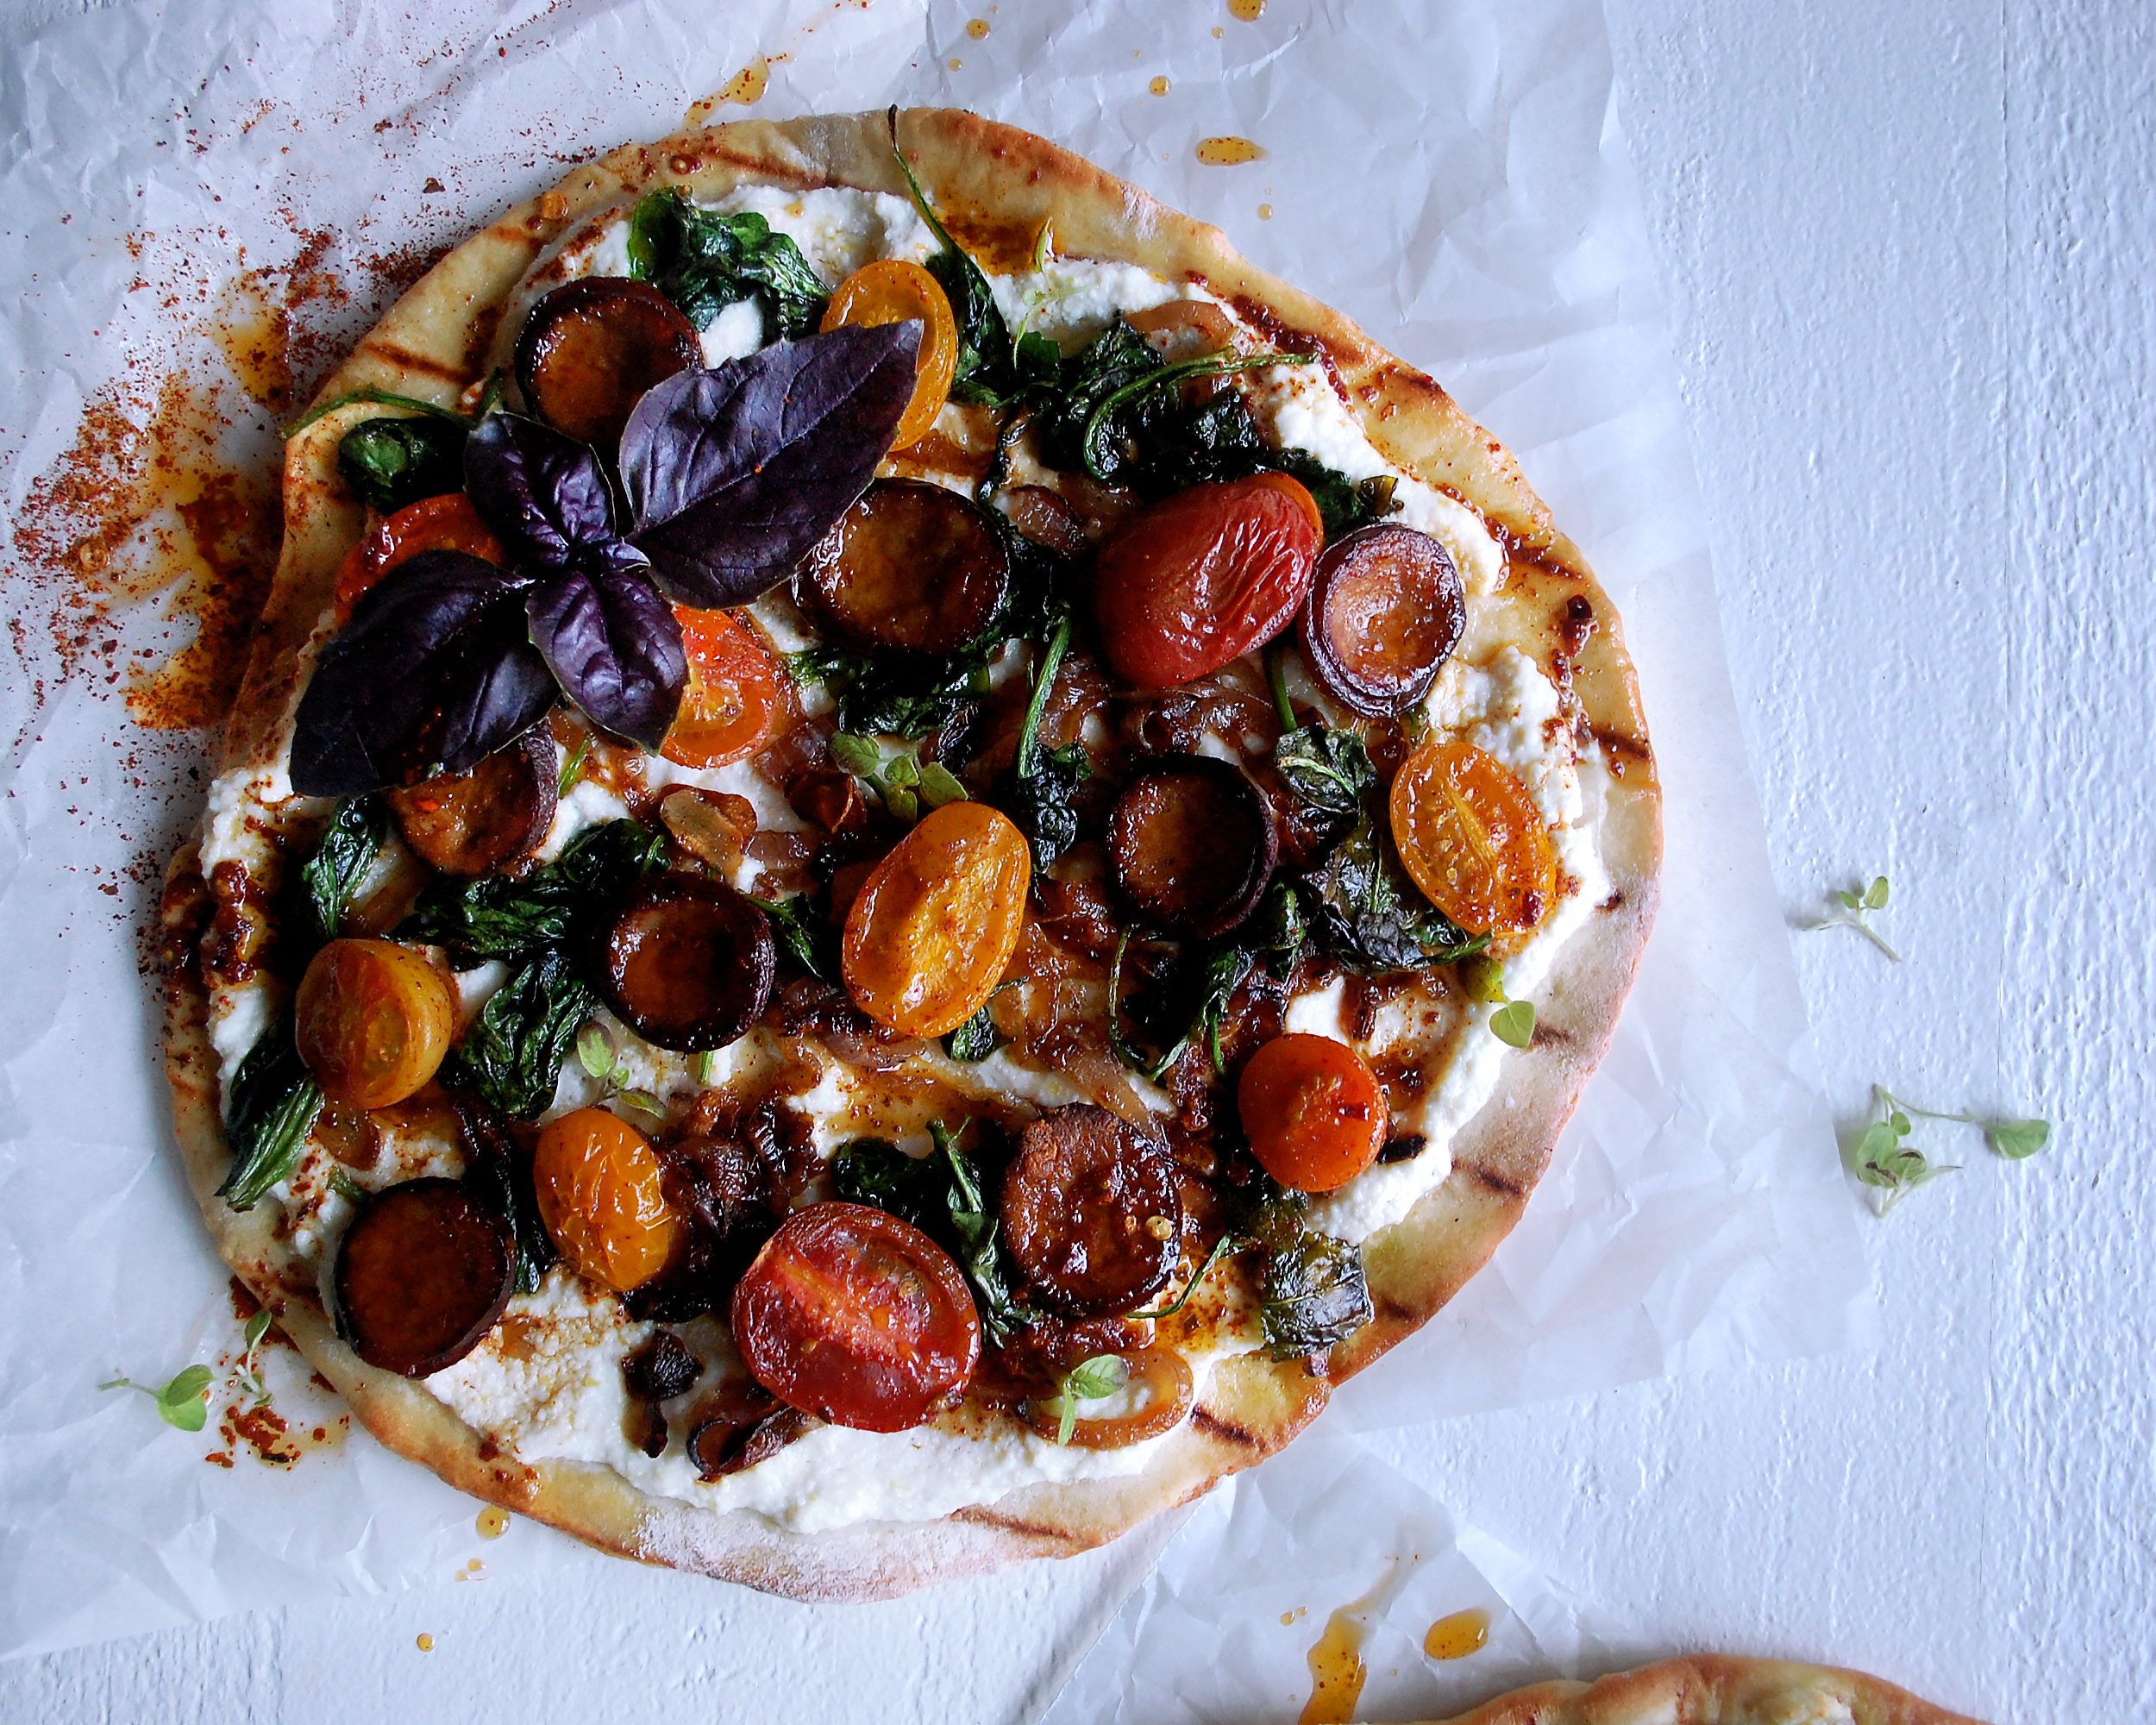 Spicy Chorizo Pizza with Caramelized Onions, Goat Cheese